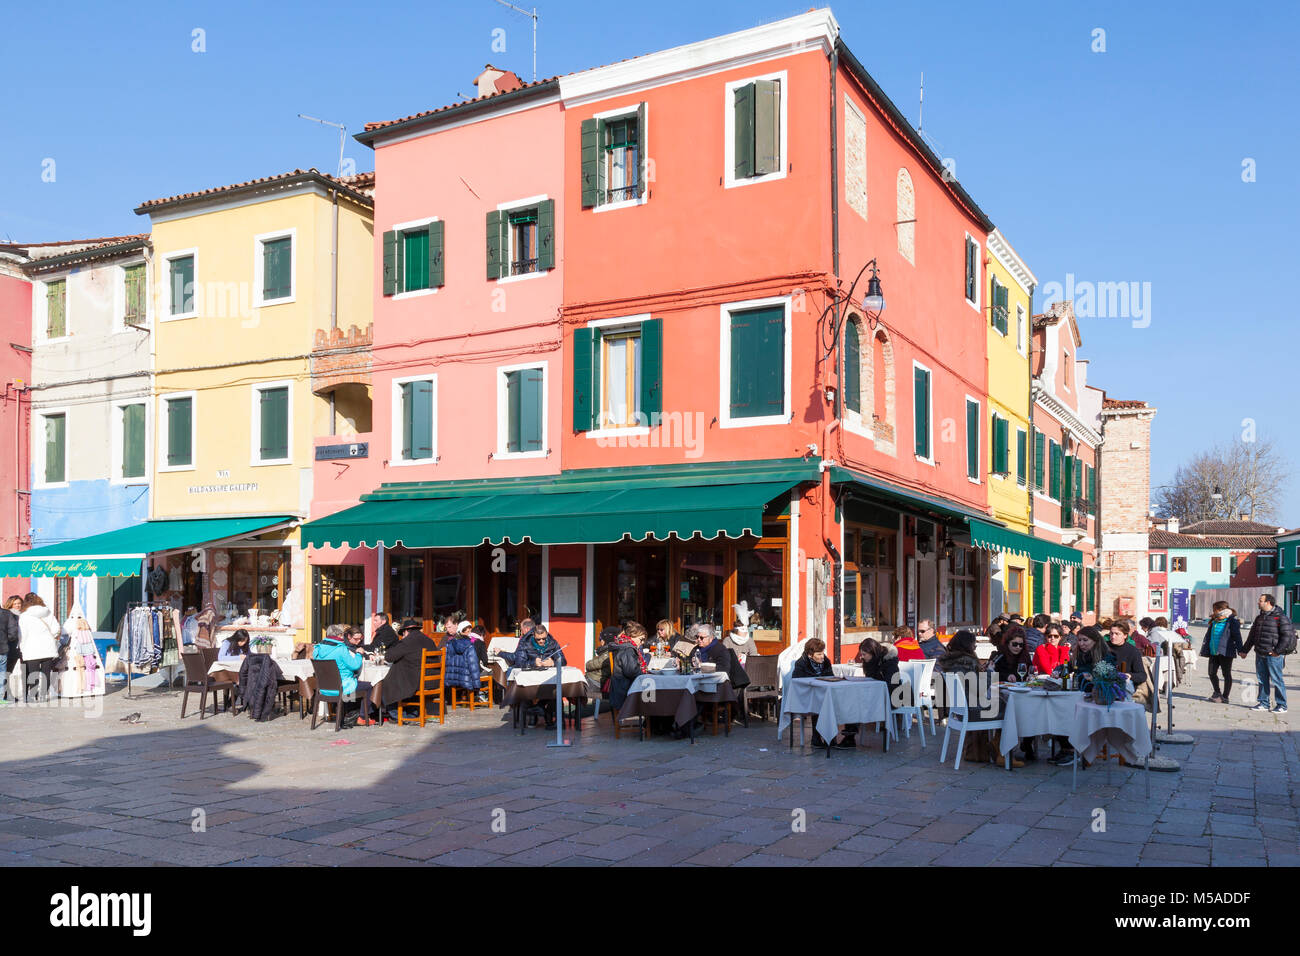 Burano Island, Venice, Veneto, Italy. People dining at an open-air restaurant in Via Baldassare Galuppi in winter with bright colourful buildings Stock Photo